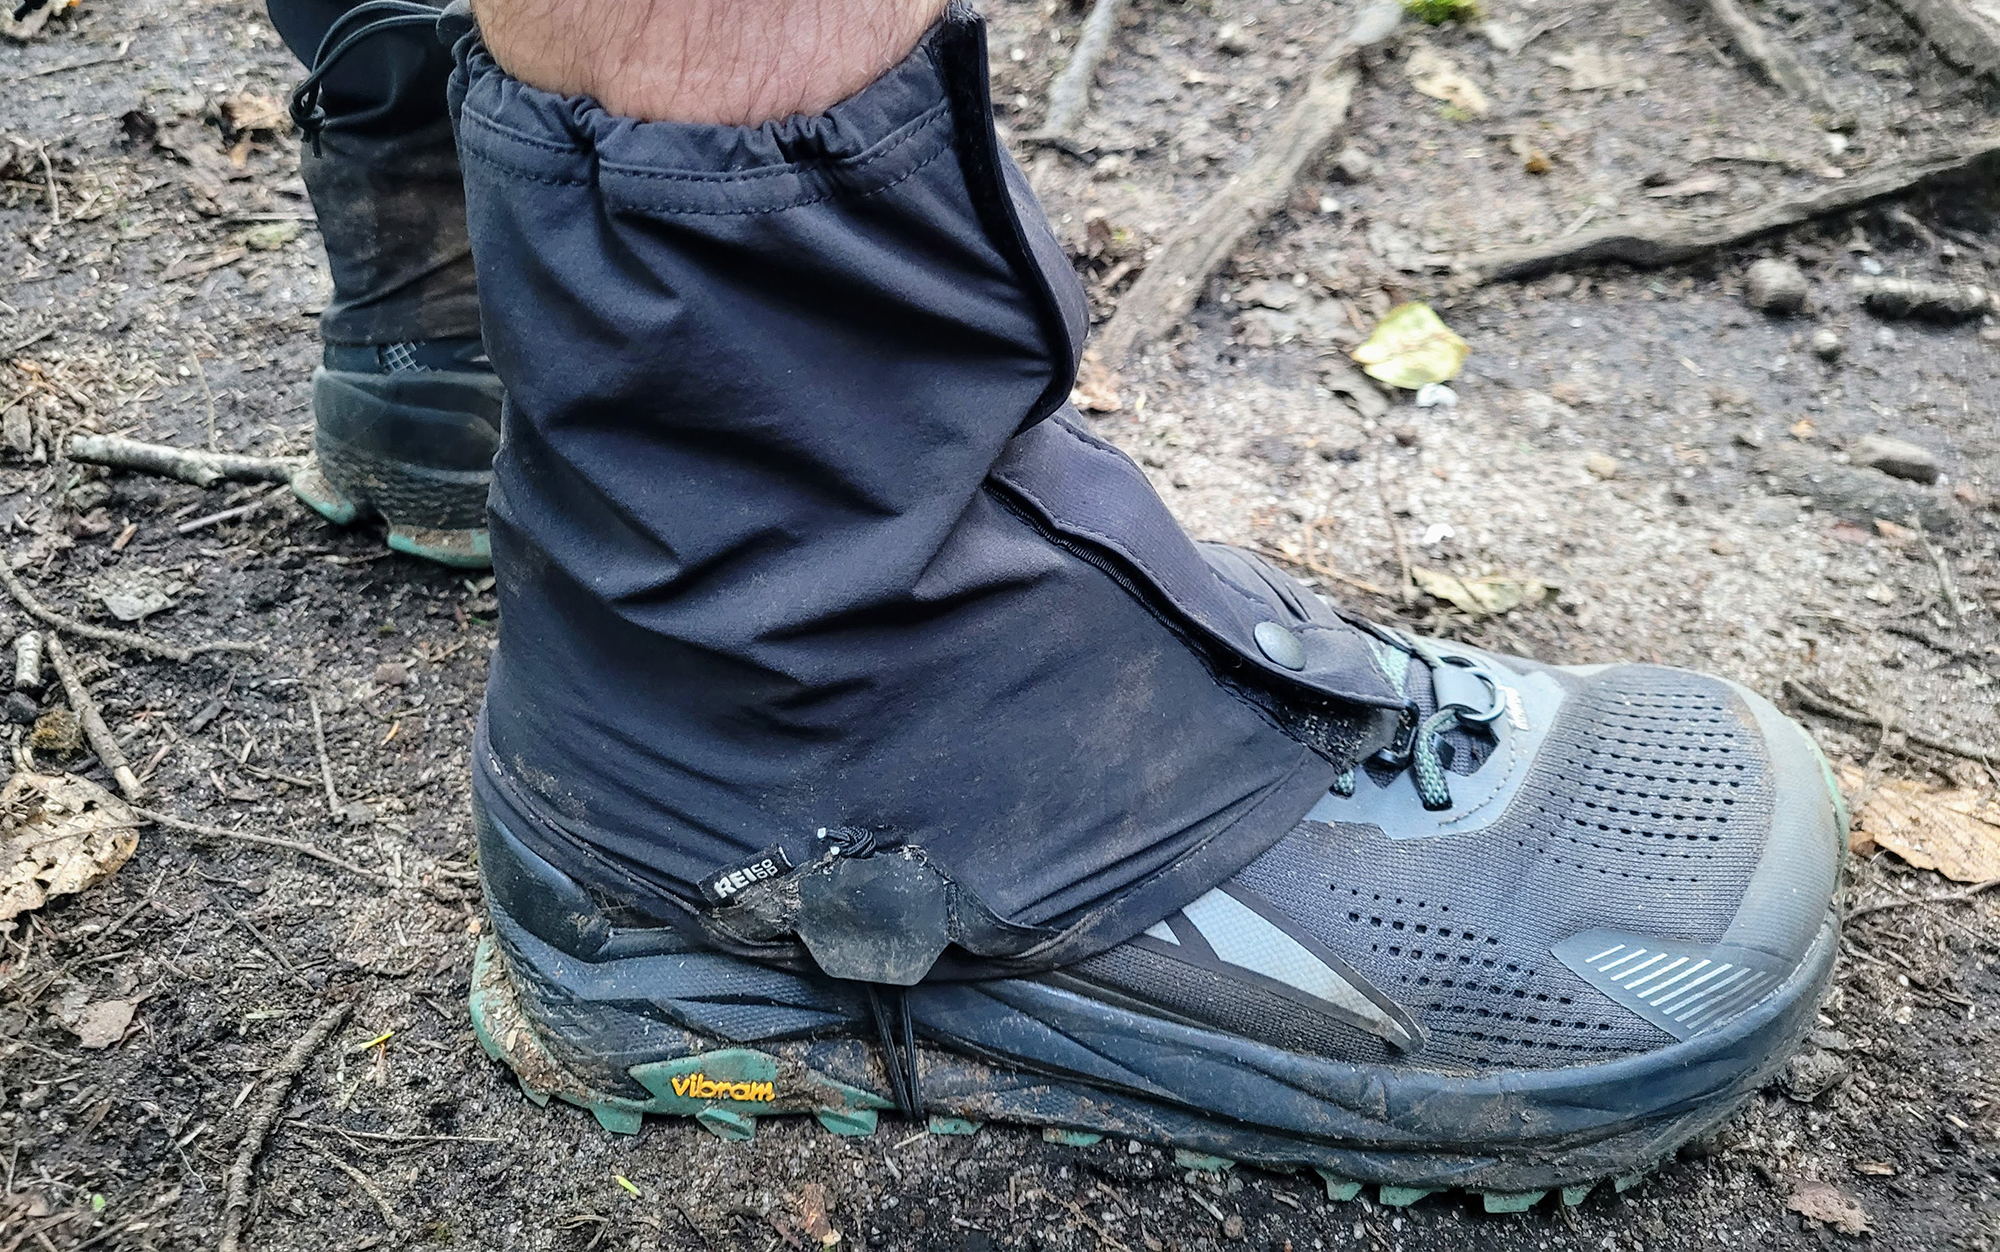 We tested the REI Co-op Flash Gaiters.